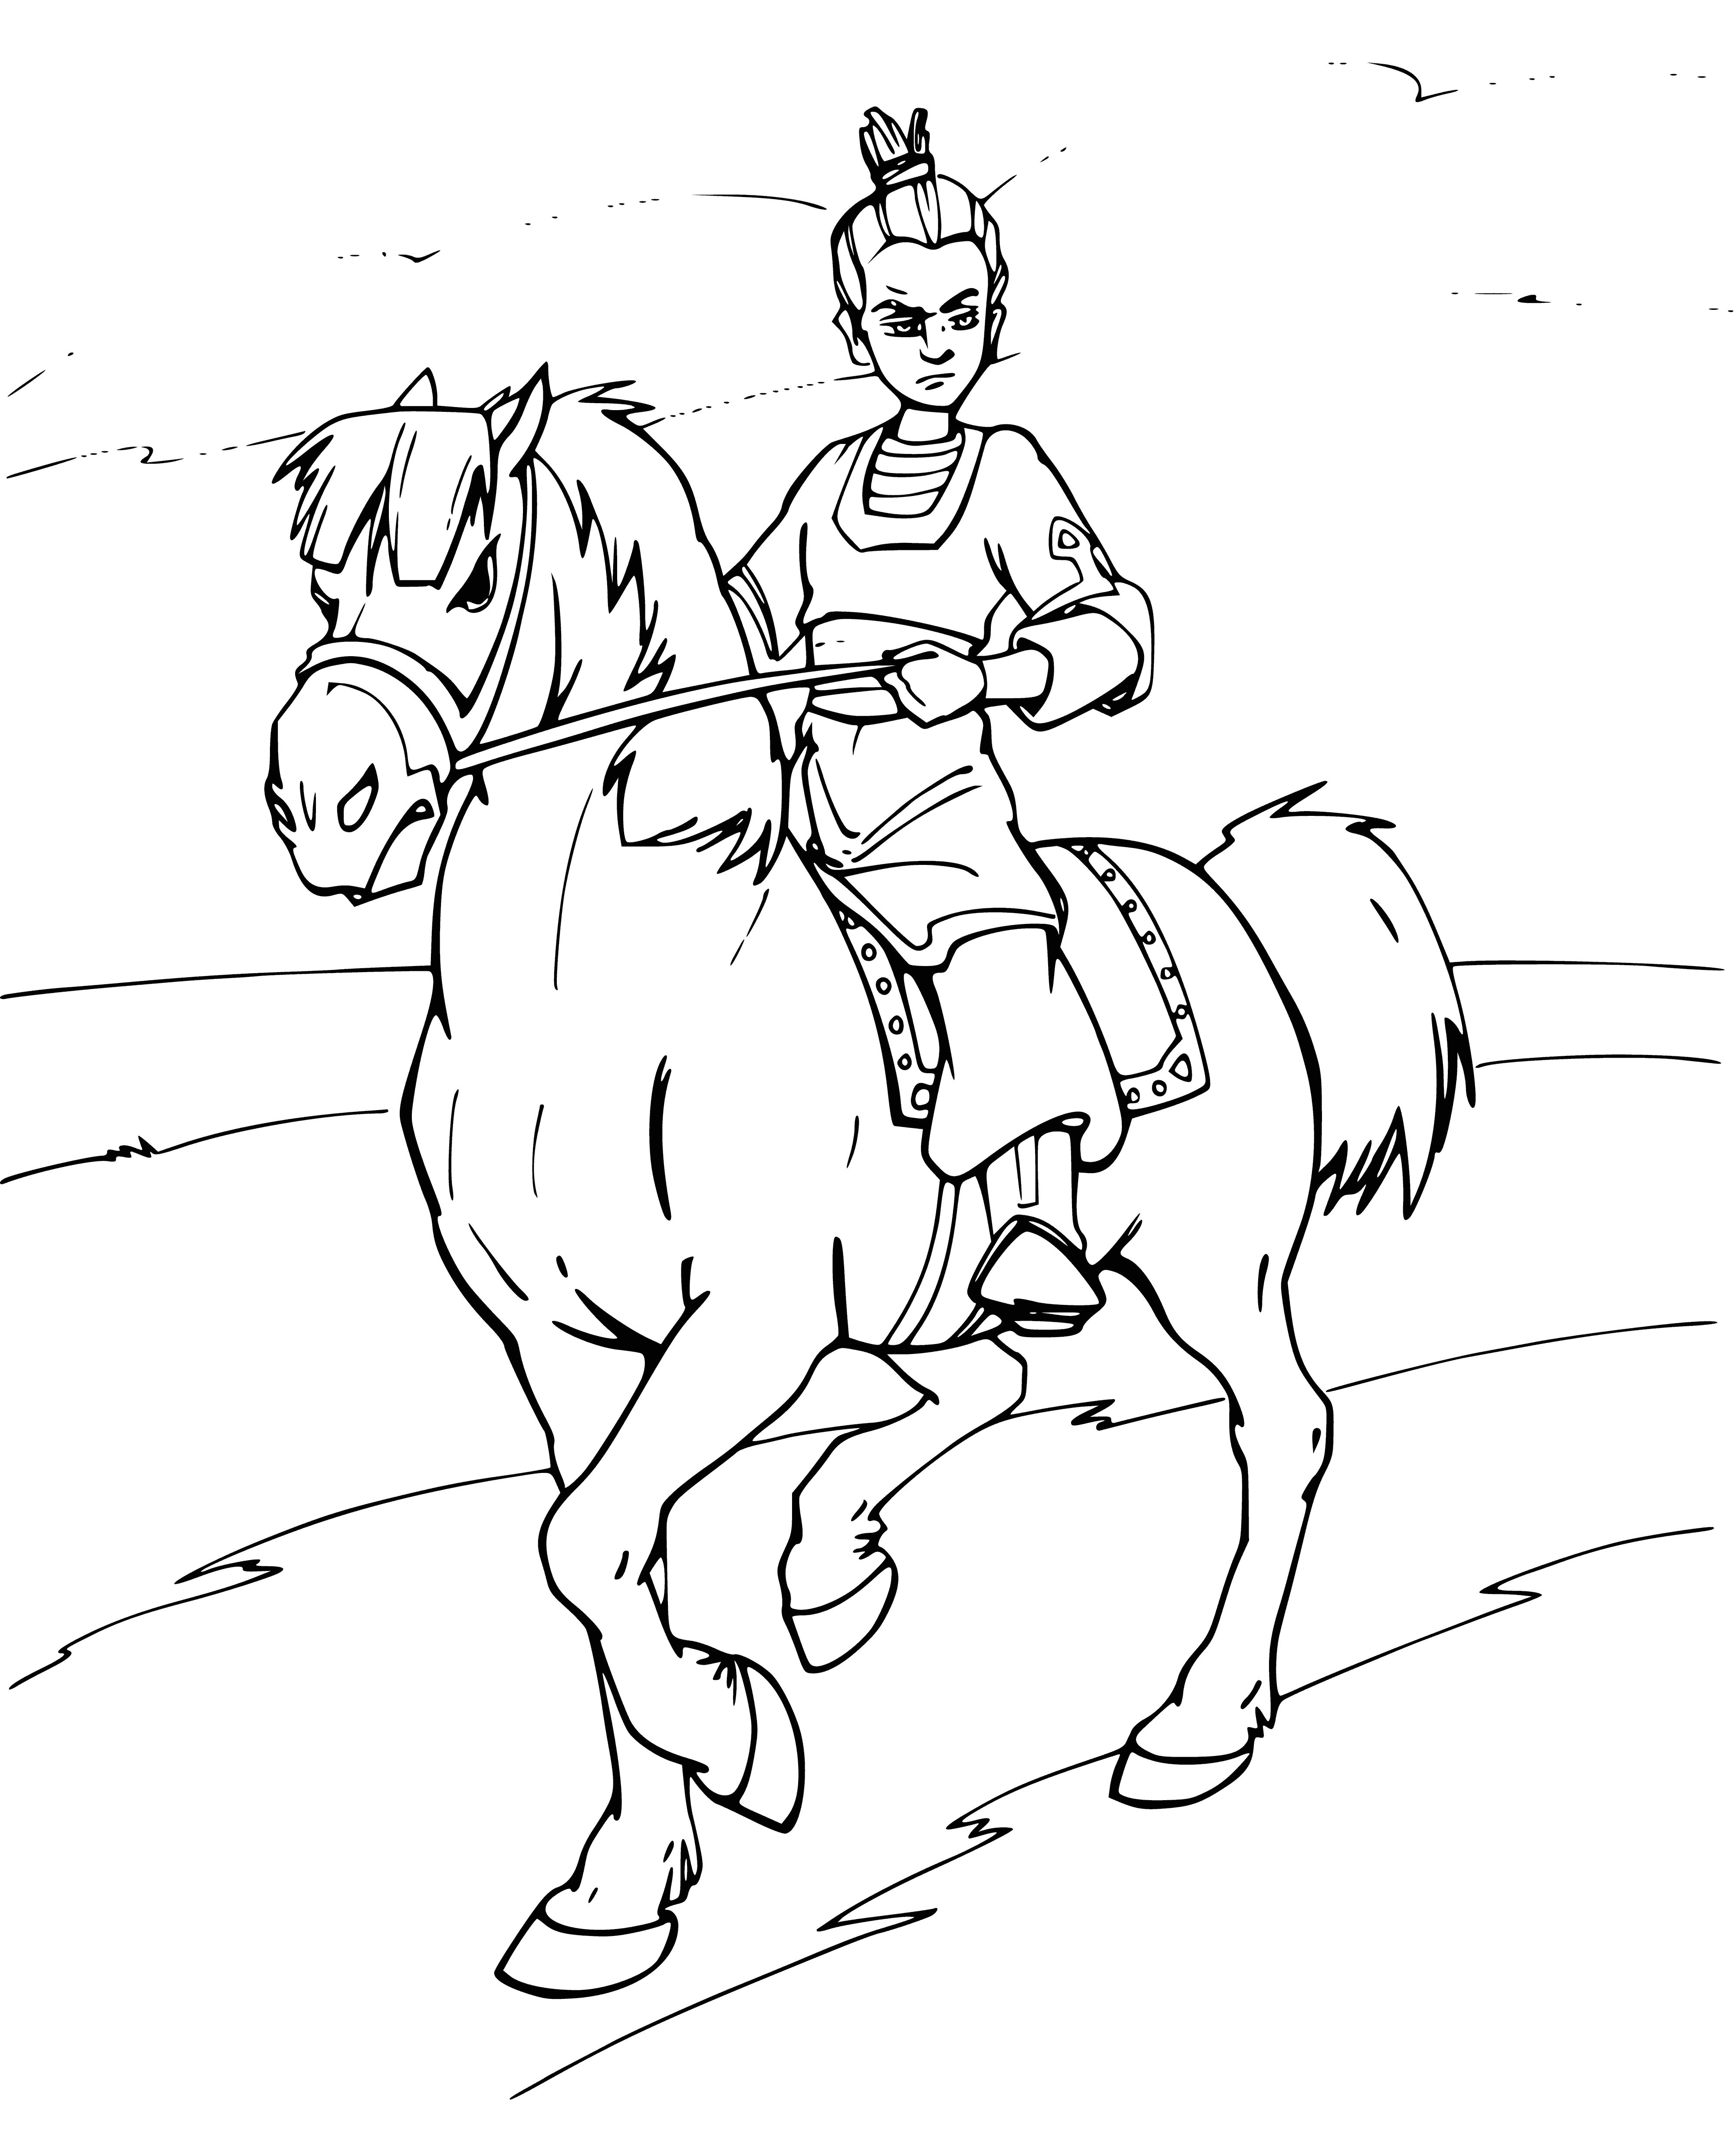 coloring page: Prince Vladimir rides a white horse wearing a blue cape, sword in hand, looking to the left.